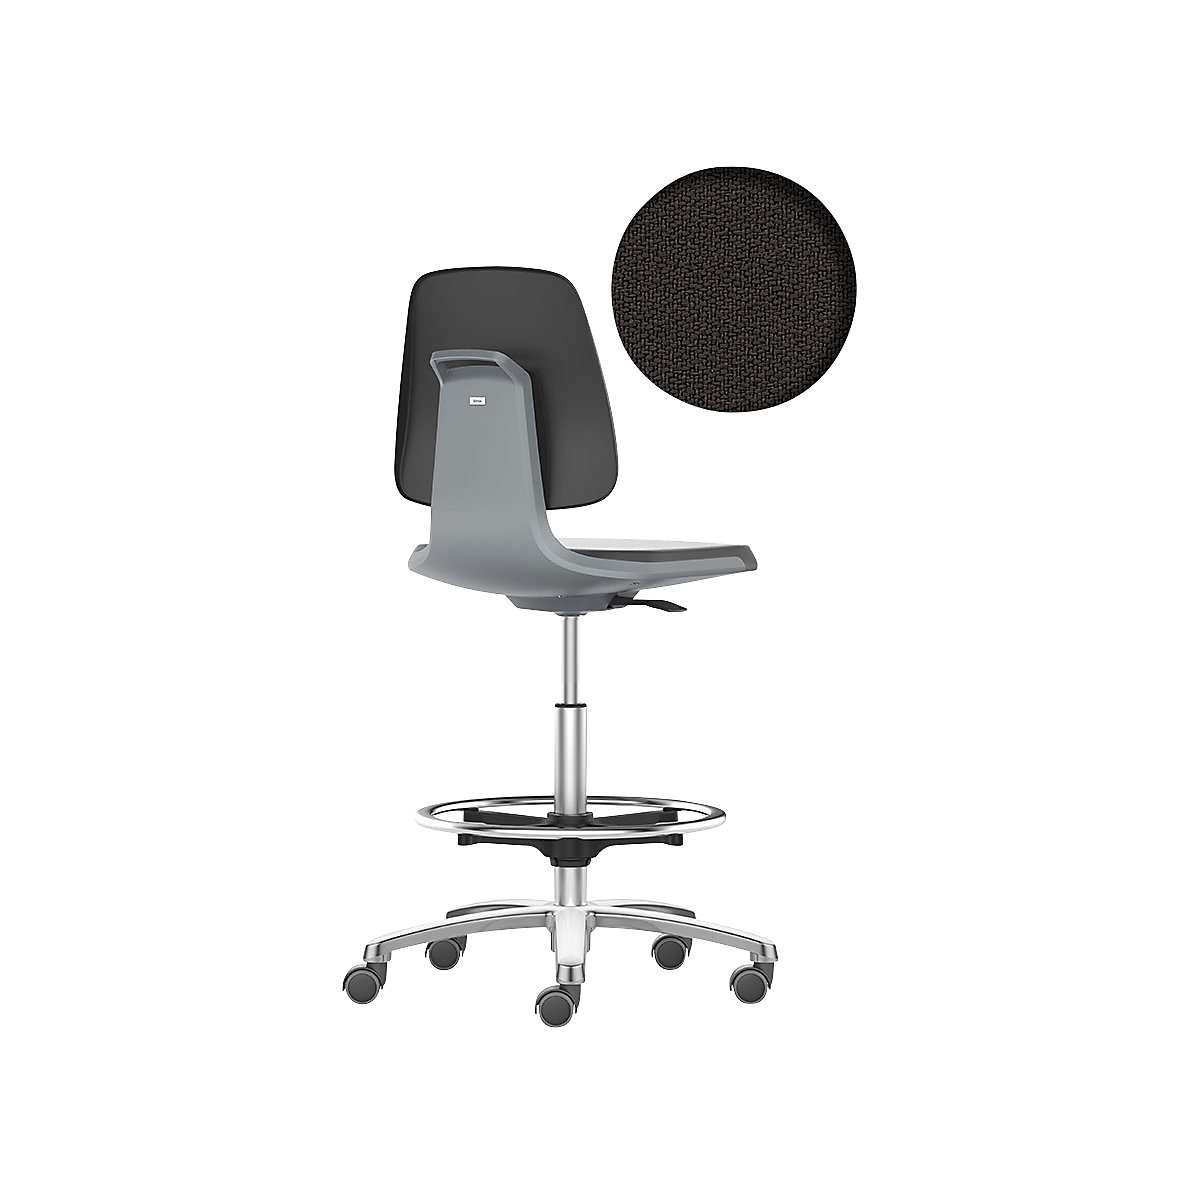 LABSIT industrial swivel chair – bimos, high chair with sit-stop castors and foot ring, fabric upholstered seat, charcoal-26